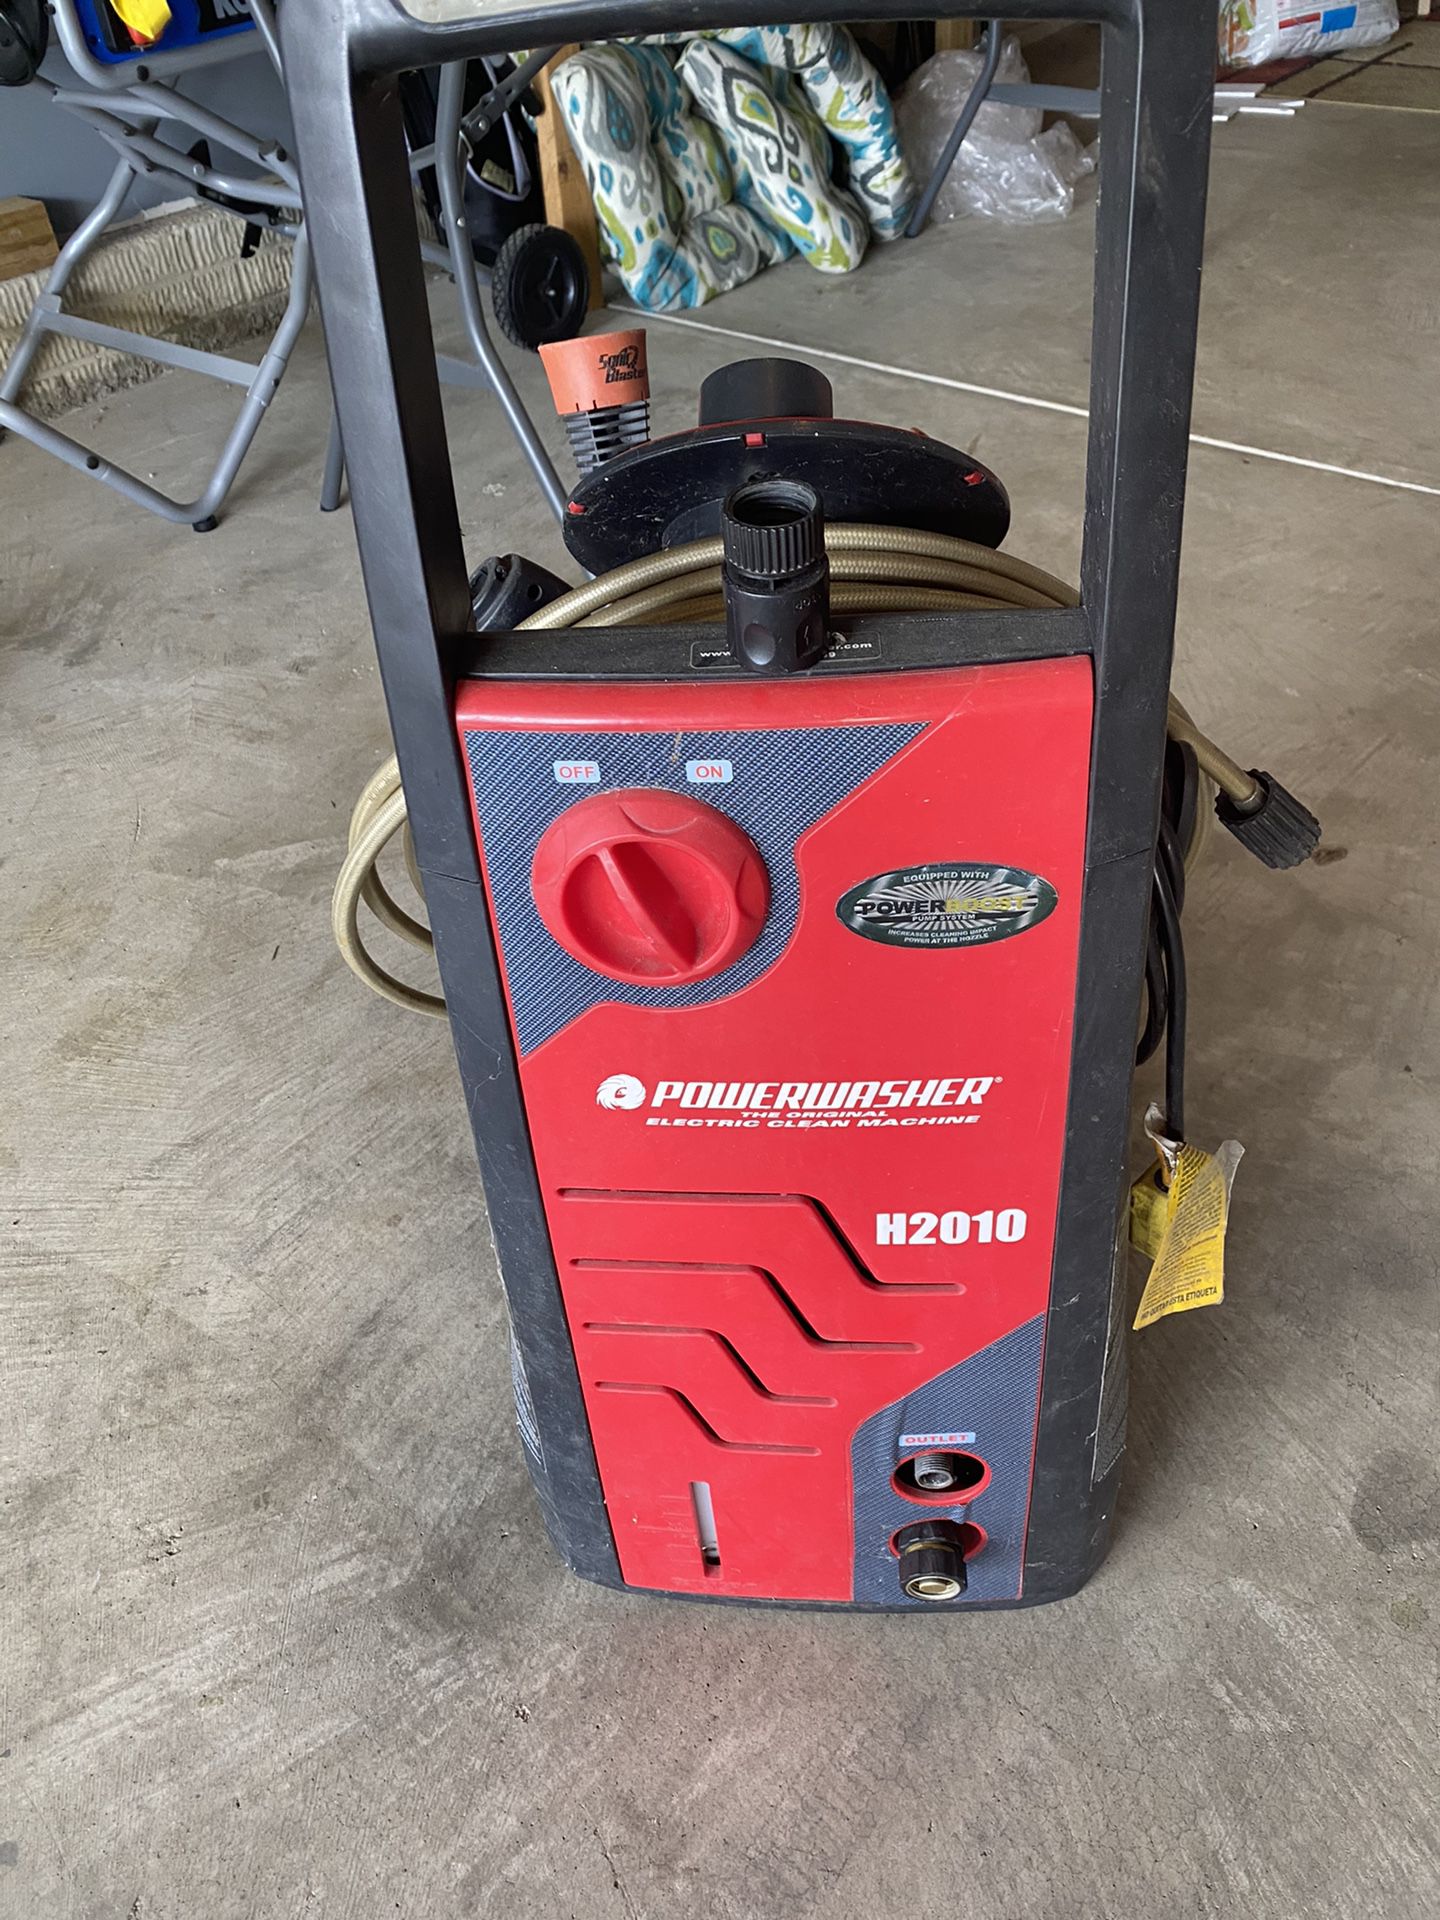 Electric Power washer